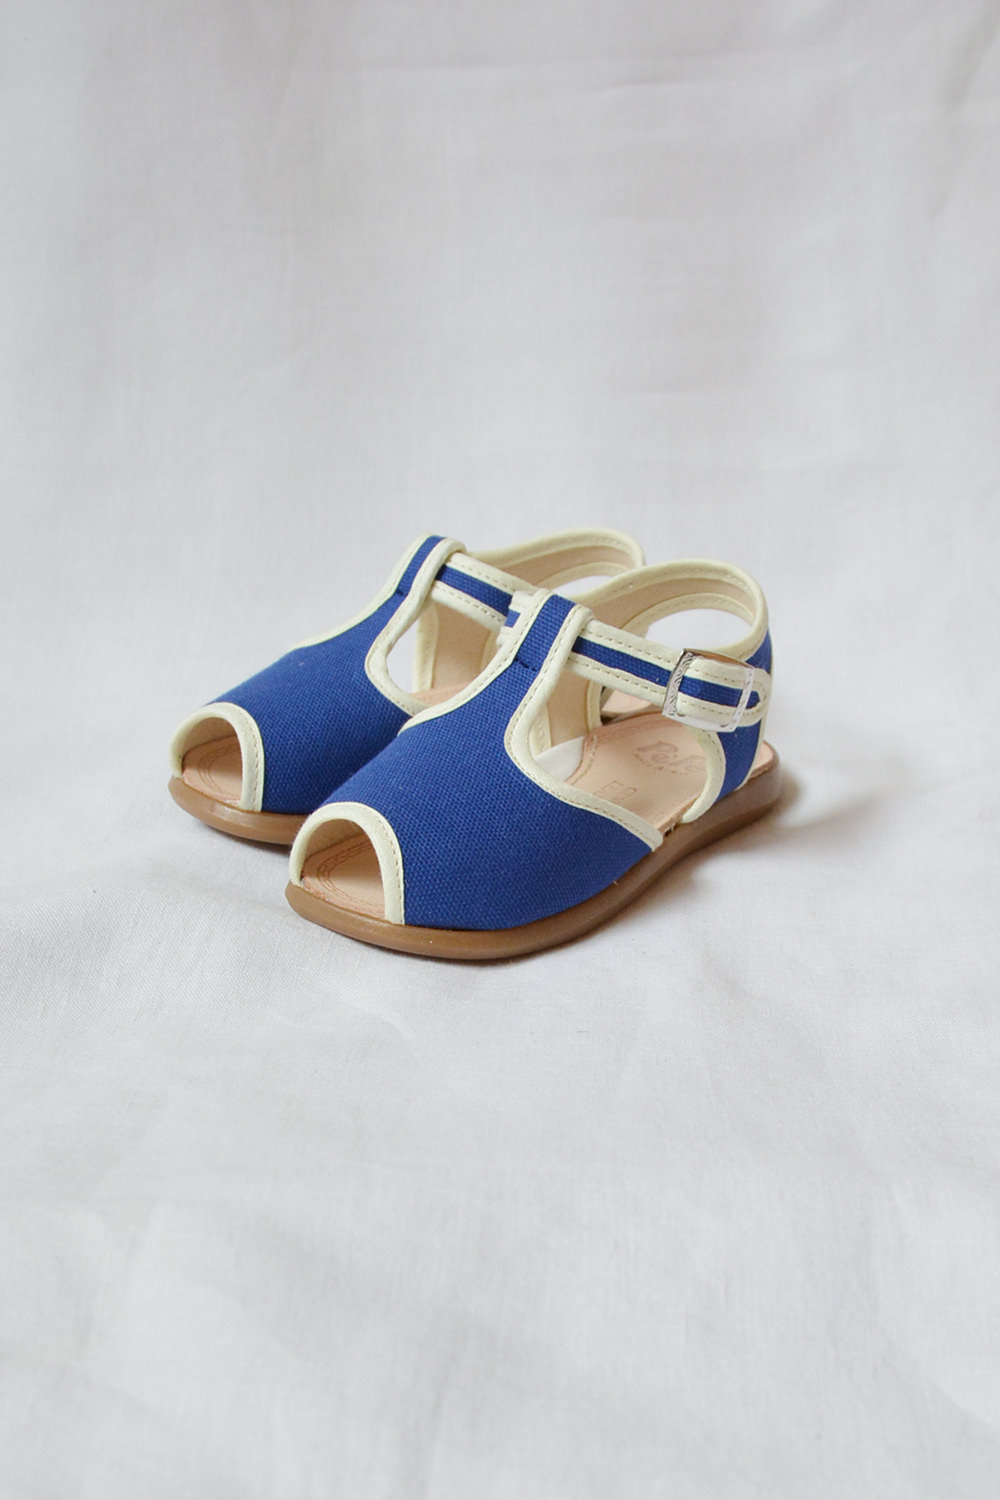 PePe Kids Sandals Gomma - Canvas with rubber sole. marine. Main.